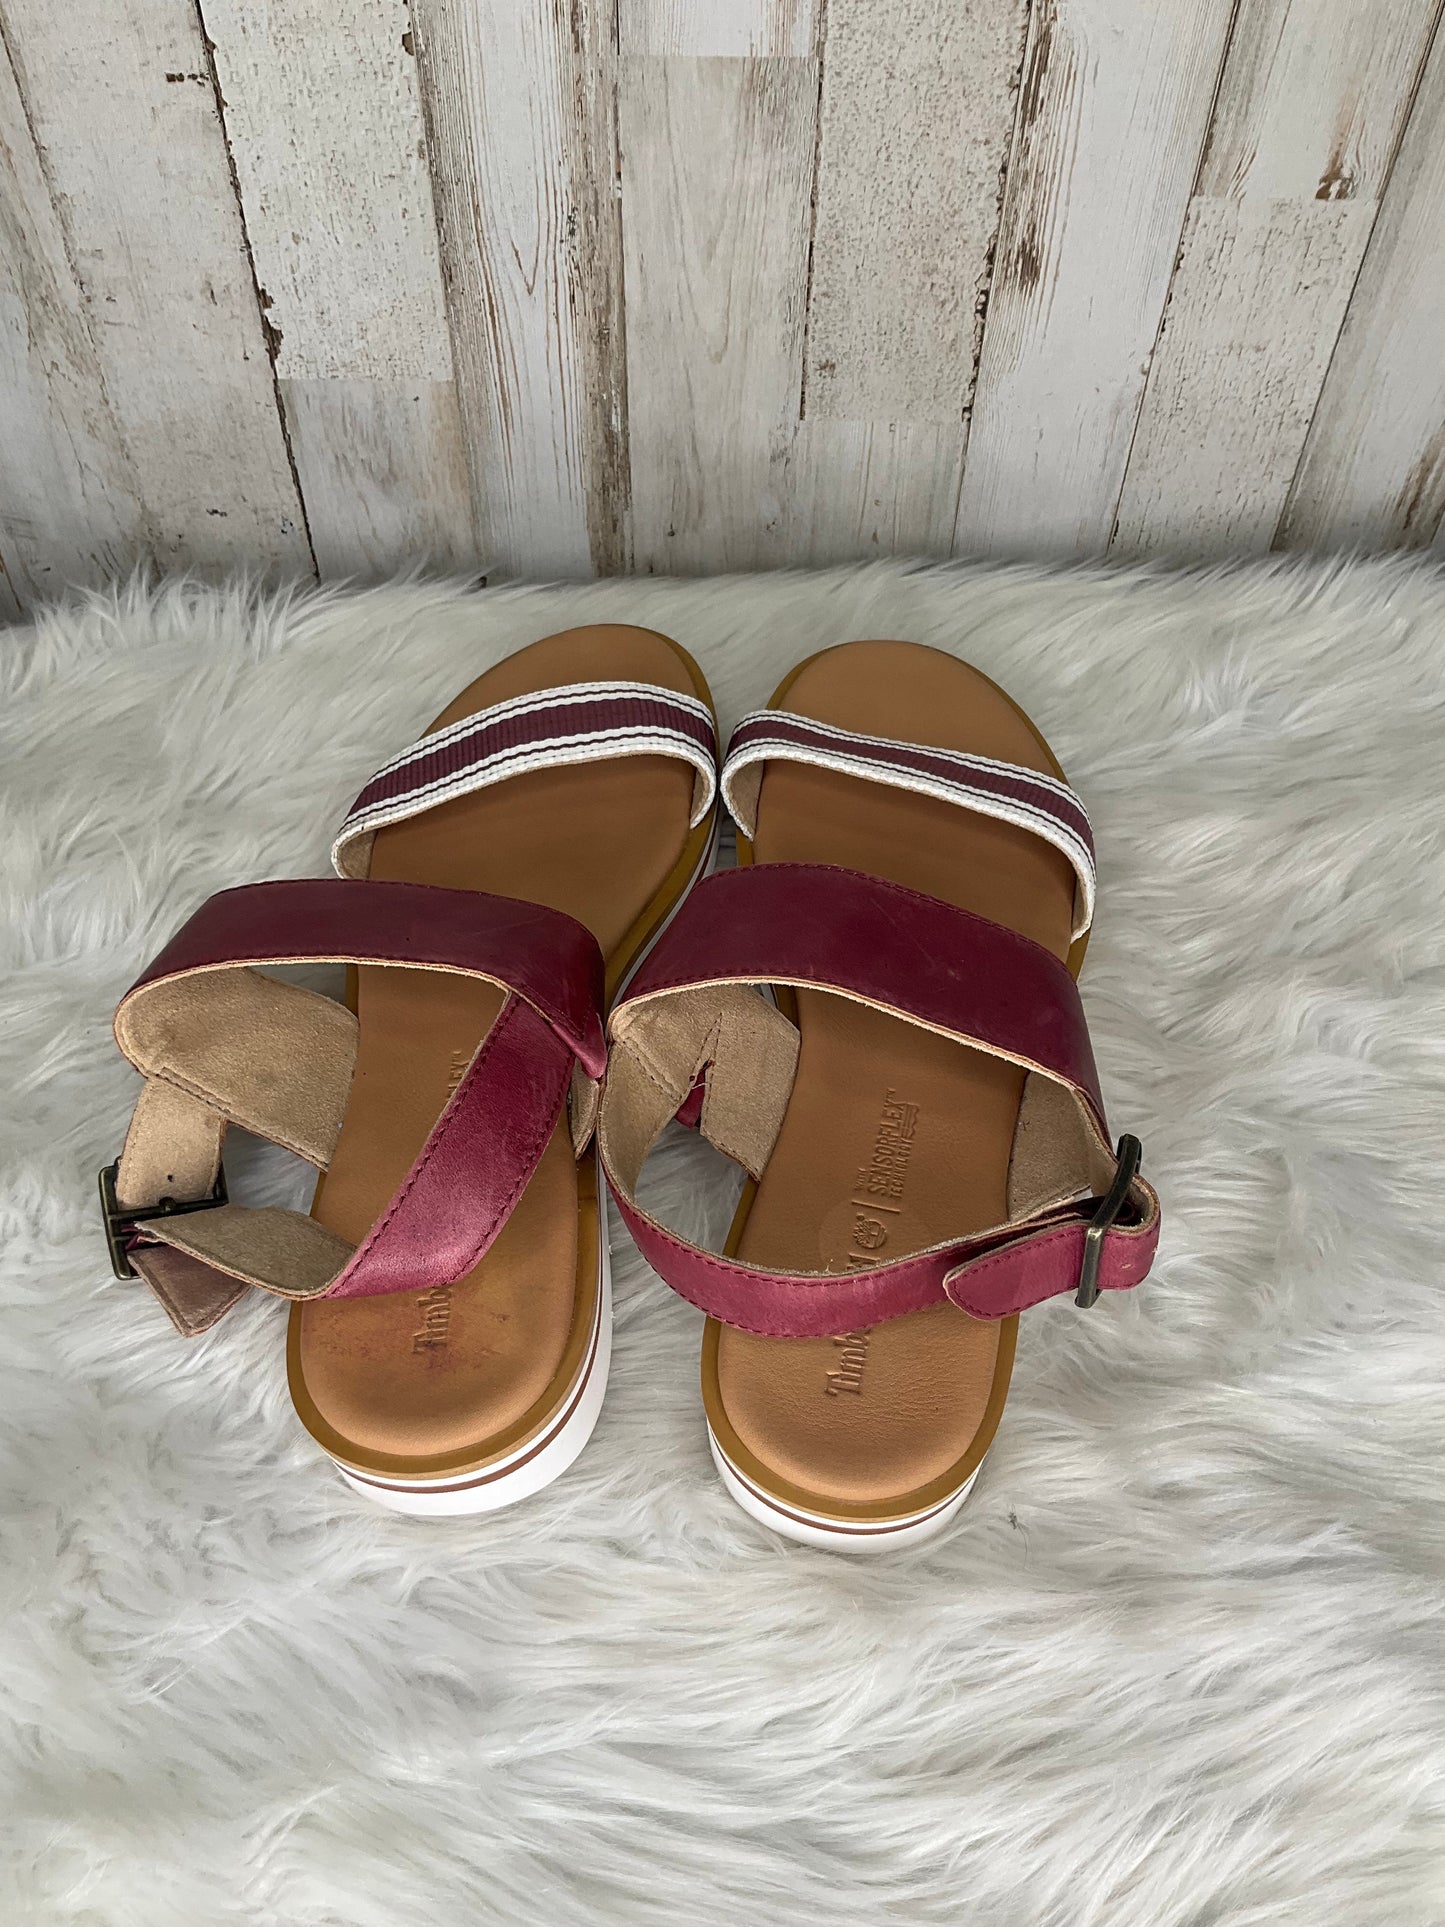 Sandals Flats By Timberland  Size: 9